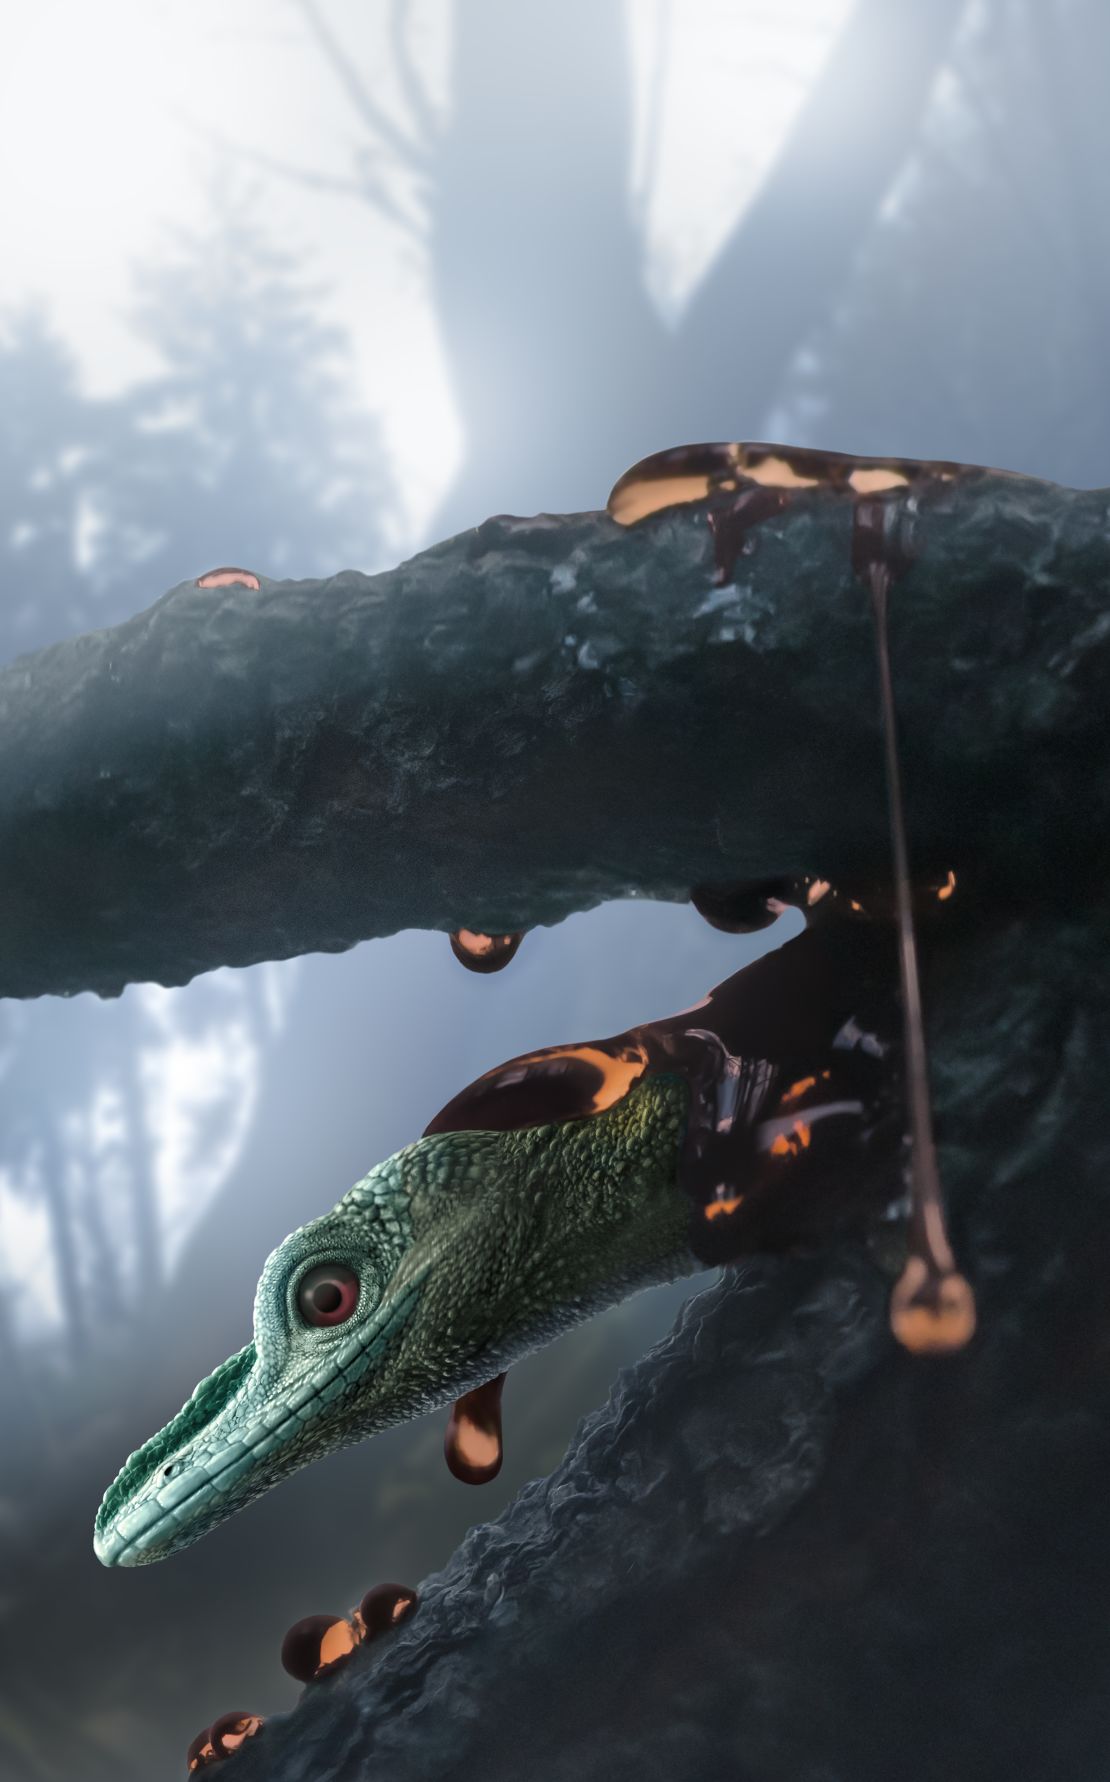 Oculudentavis naga, depicted in this artist's impression, is a bizarre lizard that research initially categorized as a tiny, birdlike dinosaur. 